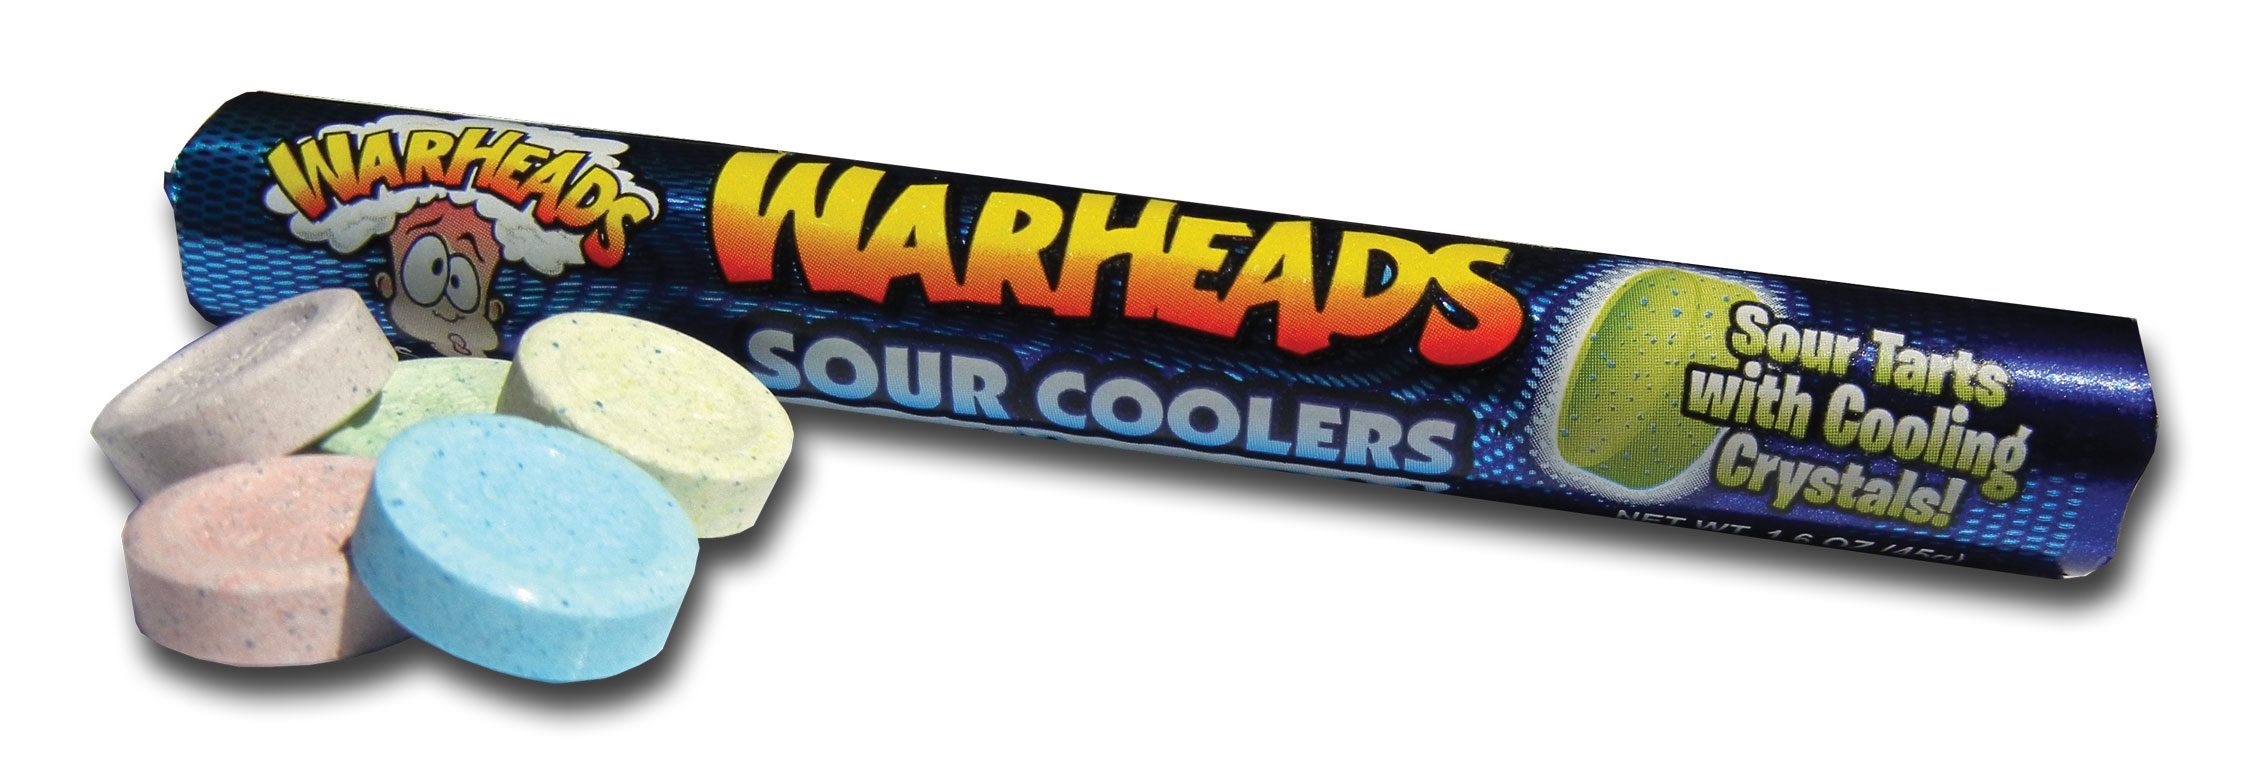 Warheads Sour Coolers 2